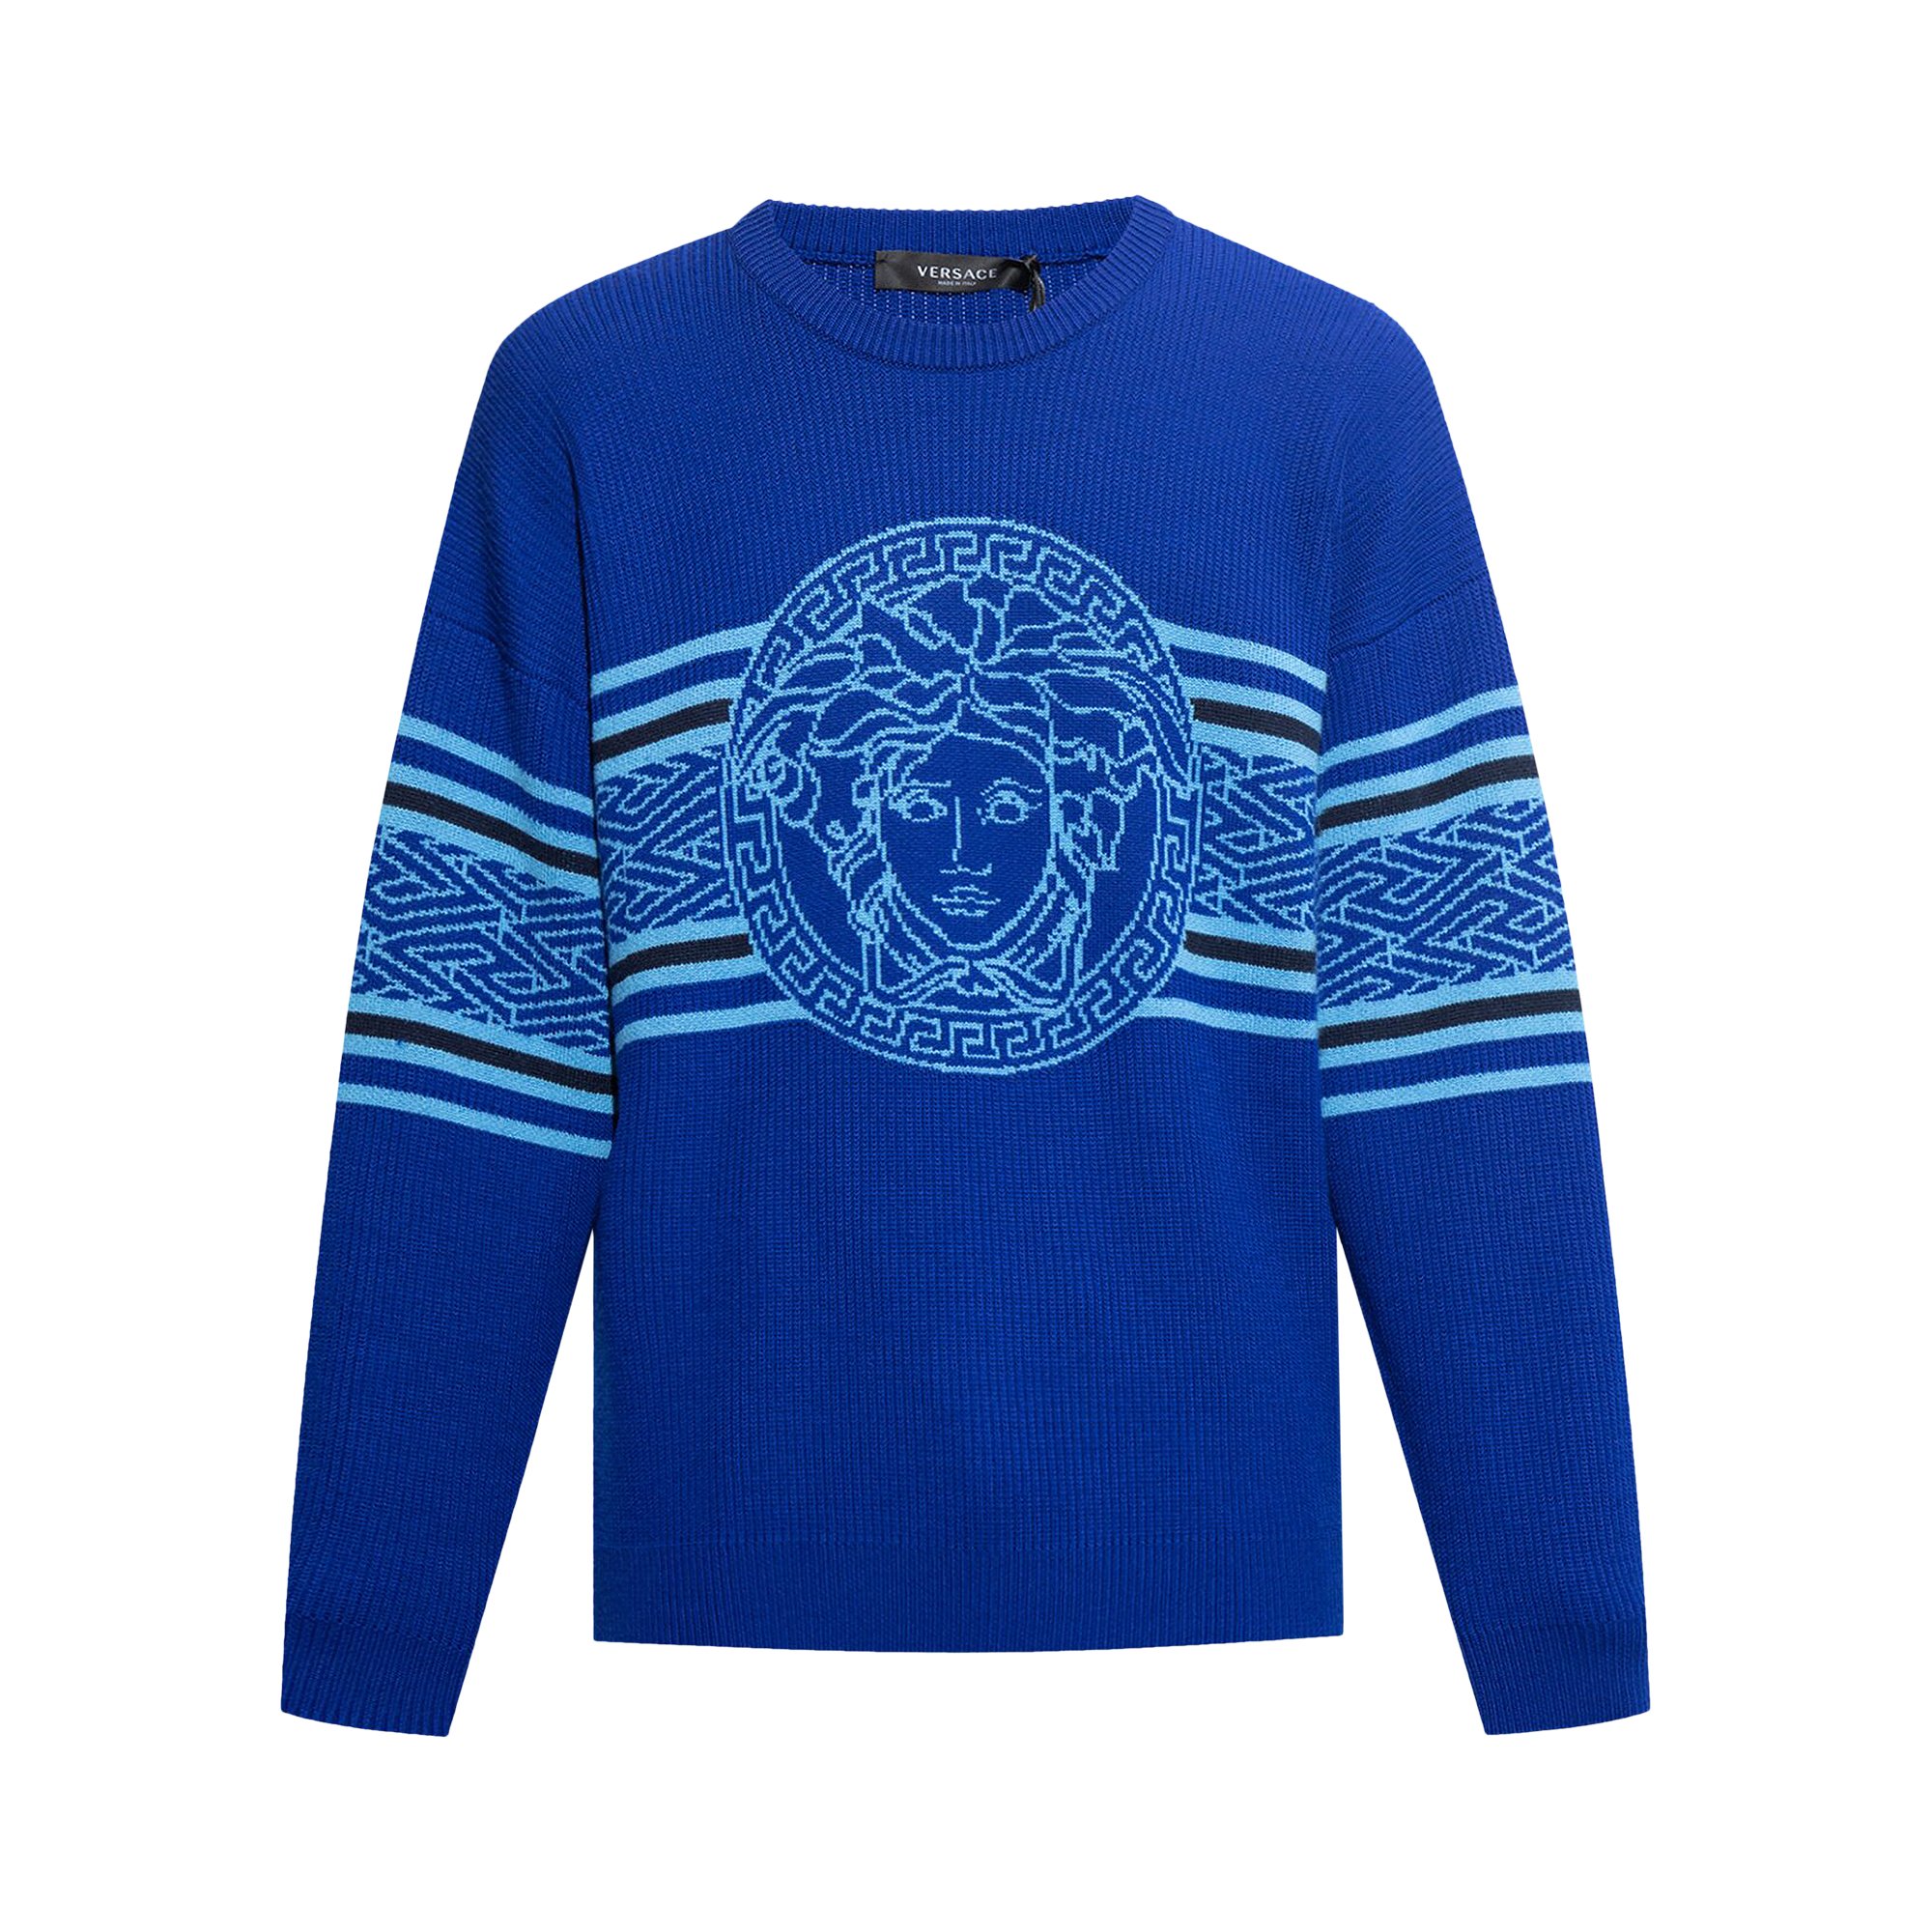 Buy Versace Medusa Graphic Knit Sweater 'Bright Blue' - 1007981 